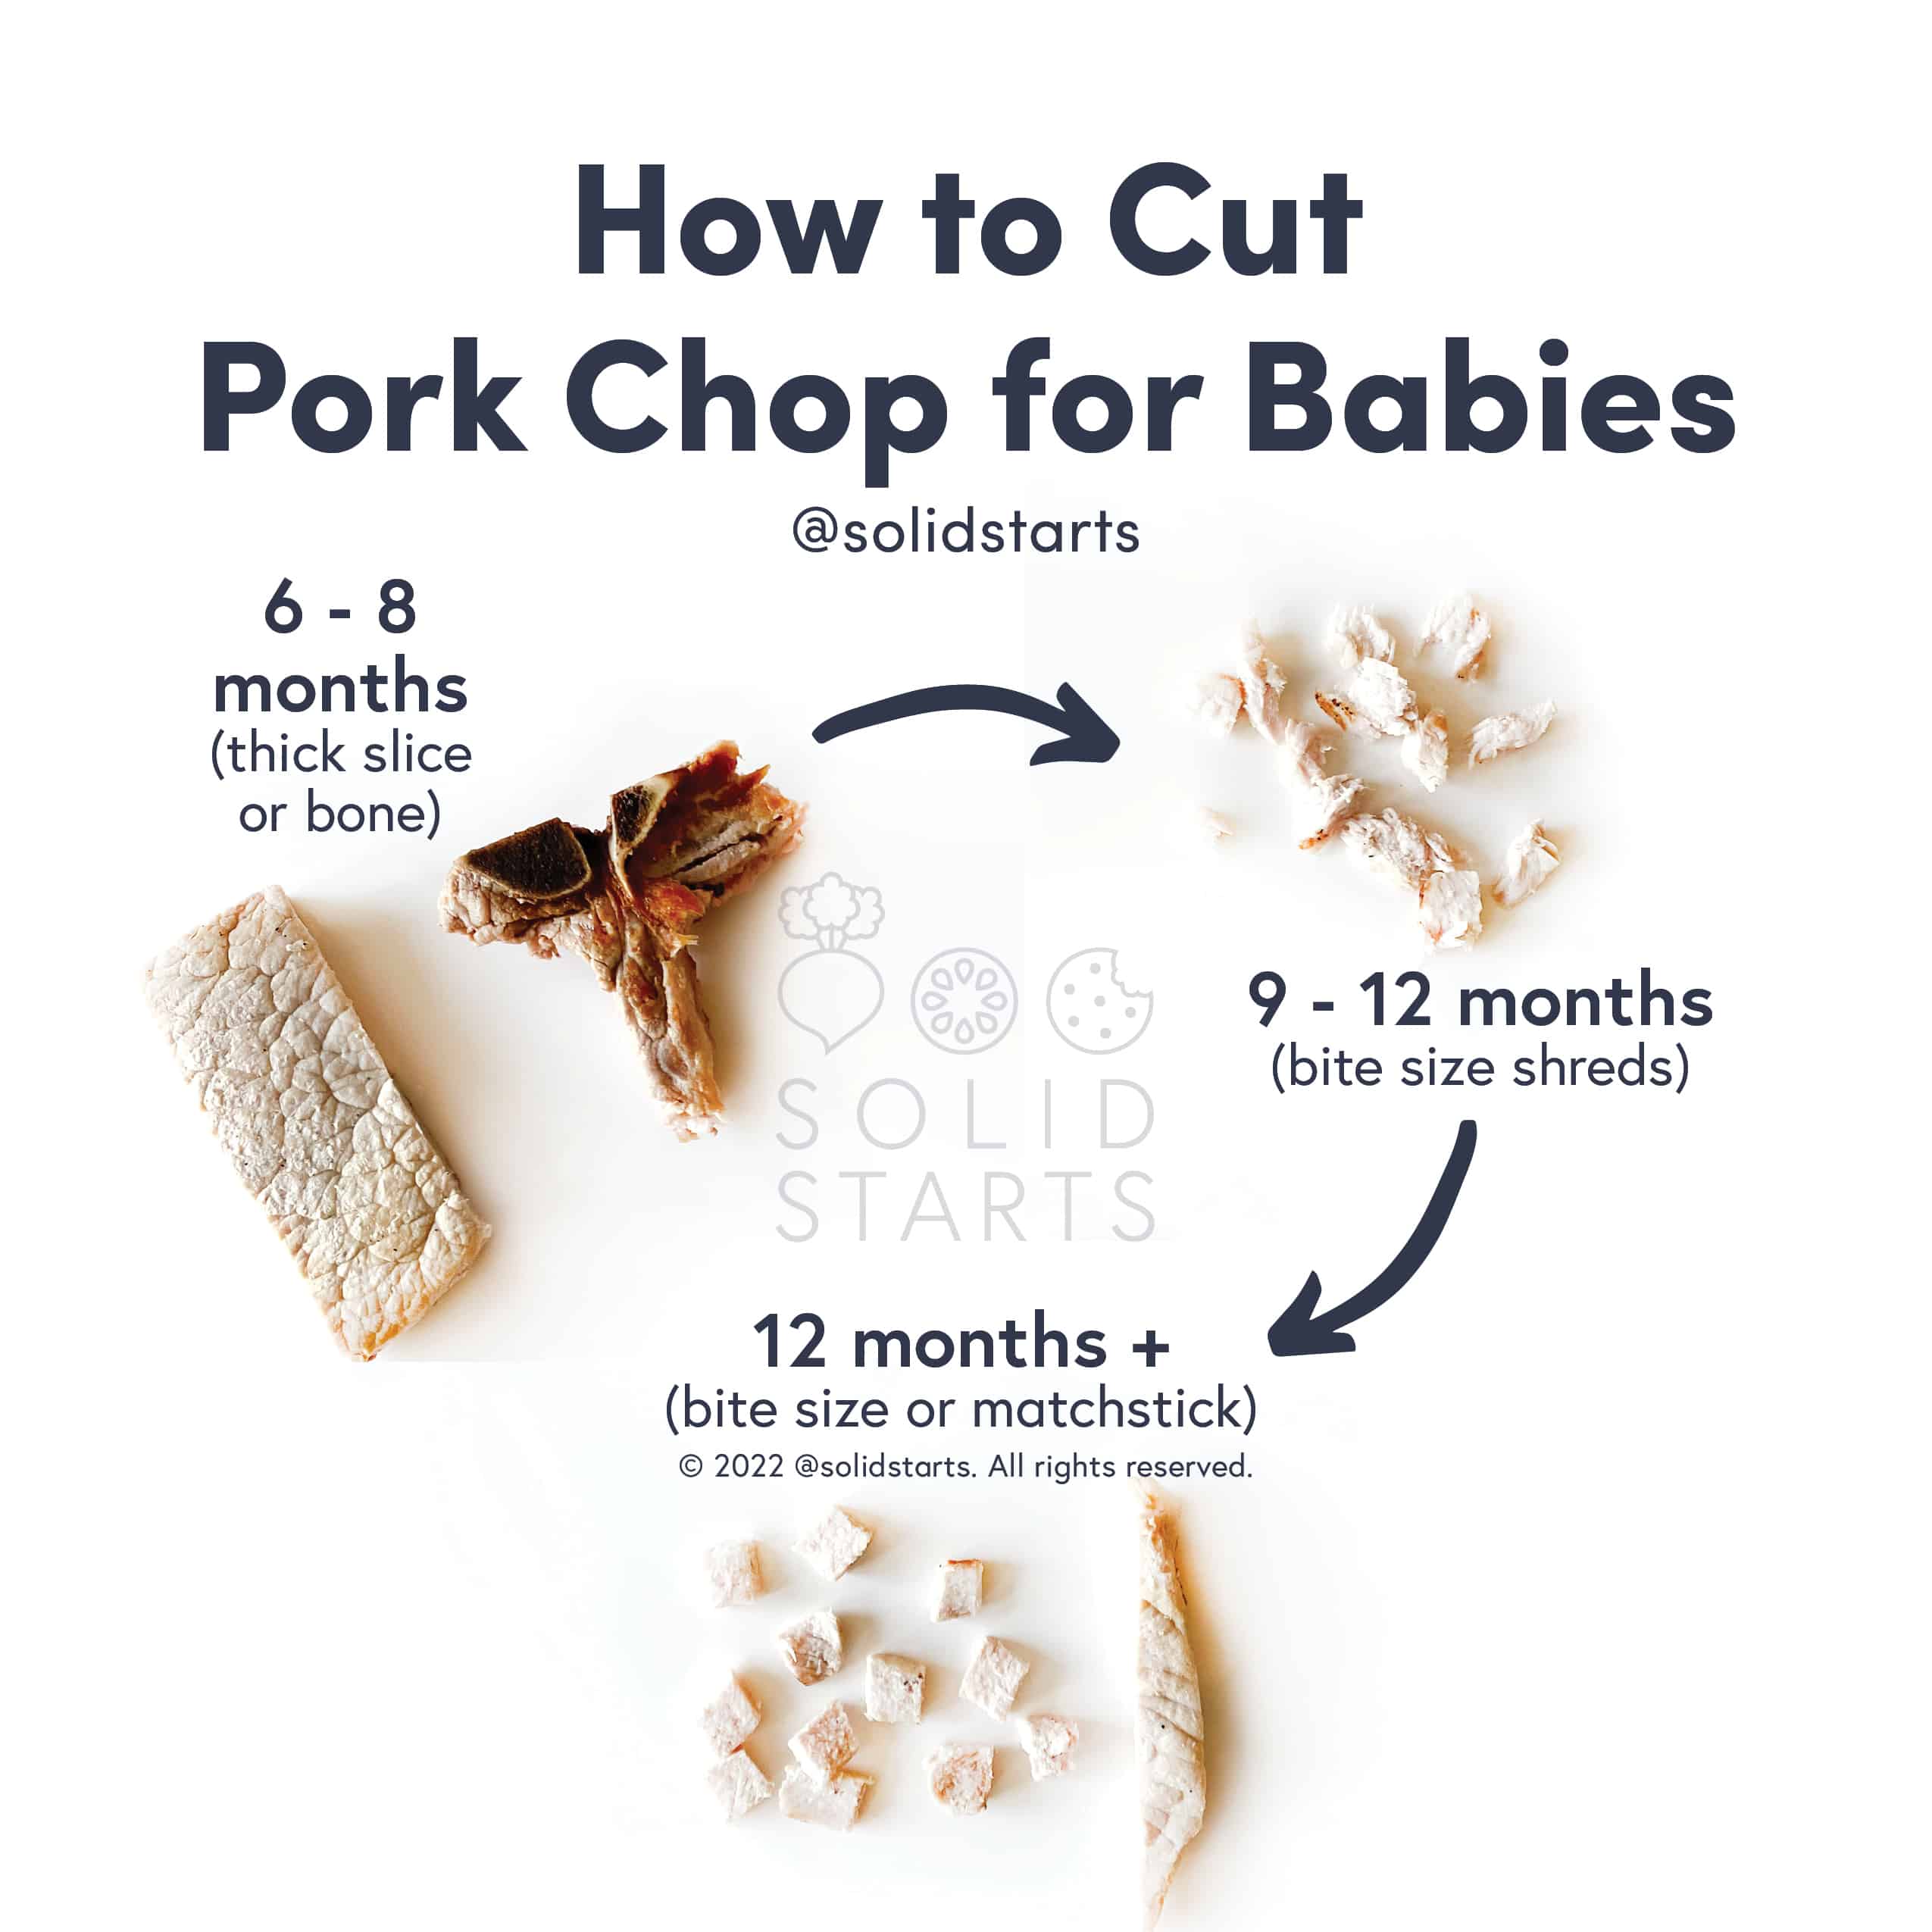 How to Cut Pork Chop for Babies